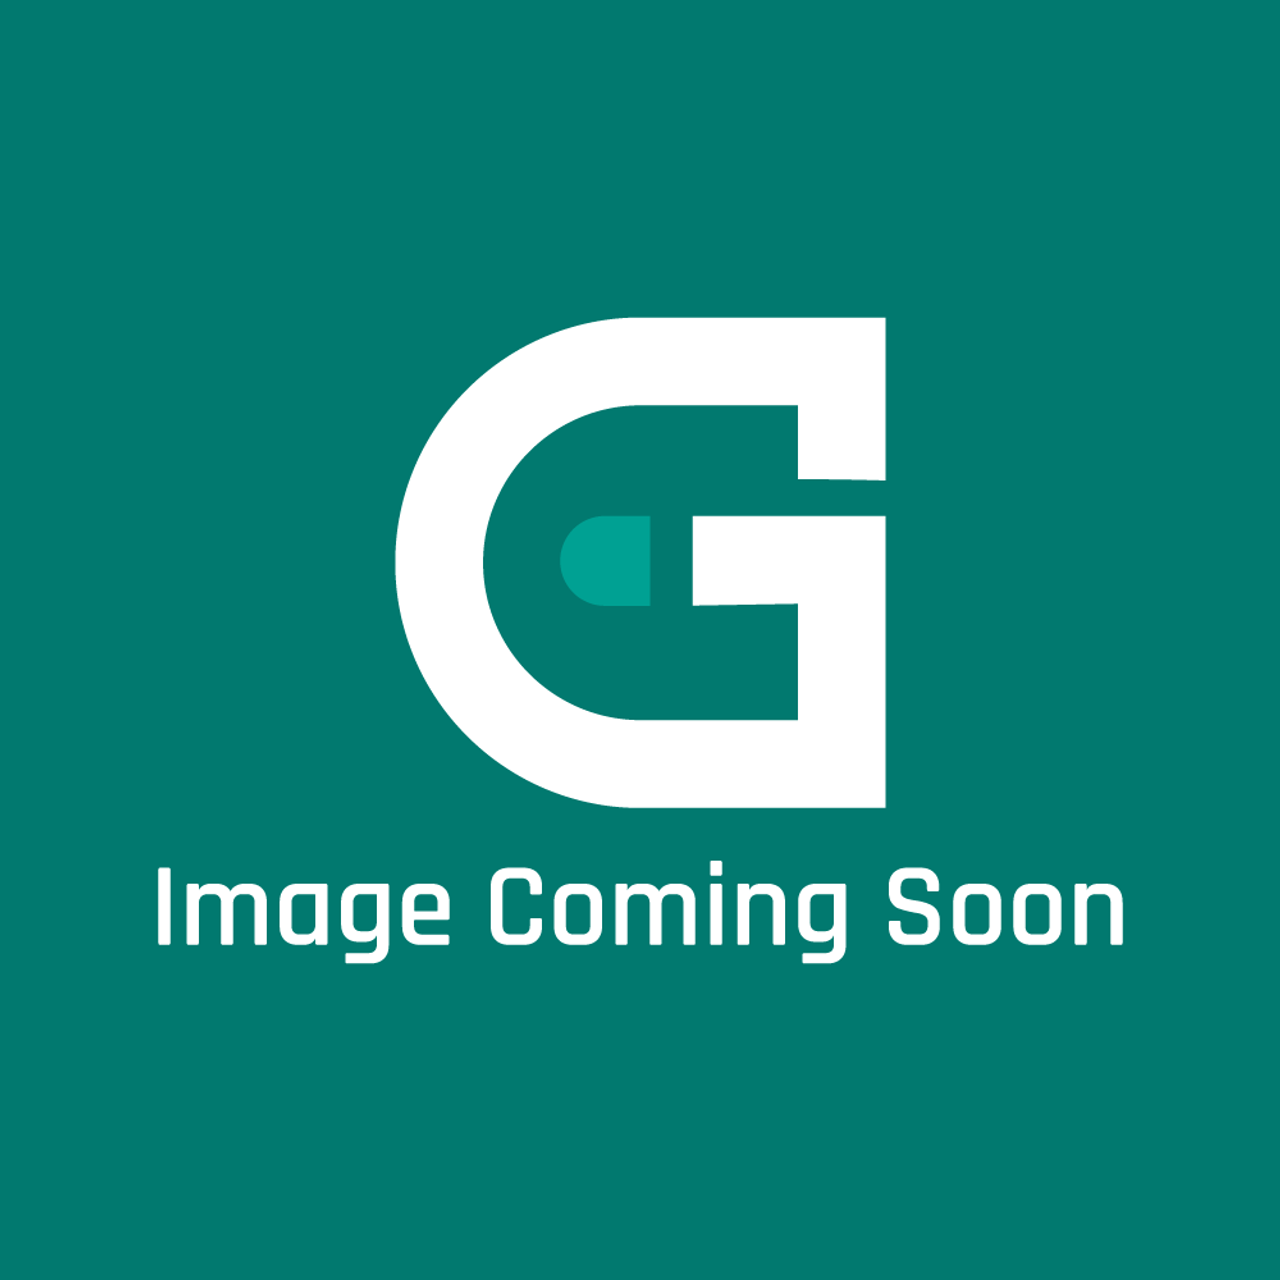 Southbend 1174409 - Flue Riser Center Suppor T - Image Coming Soon!